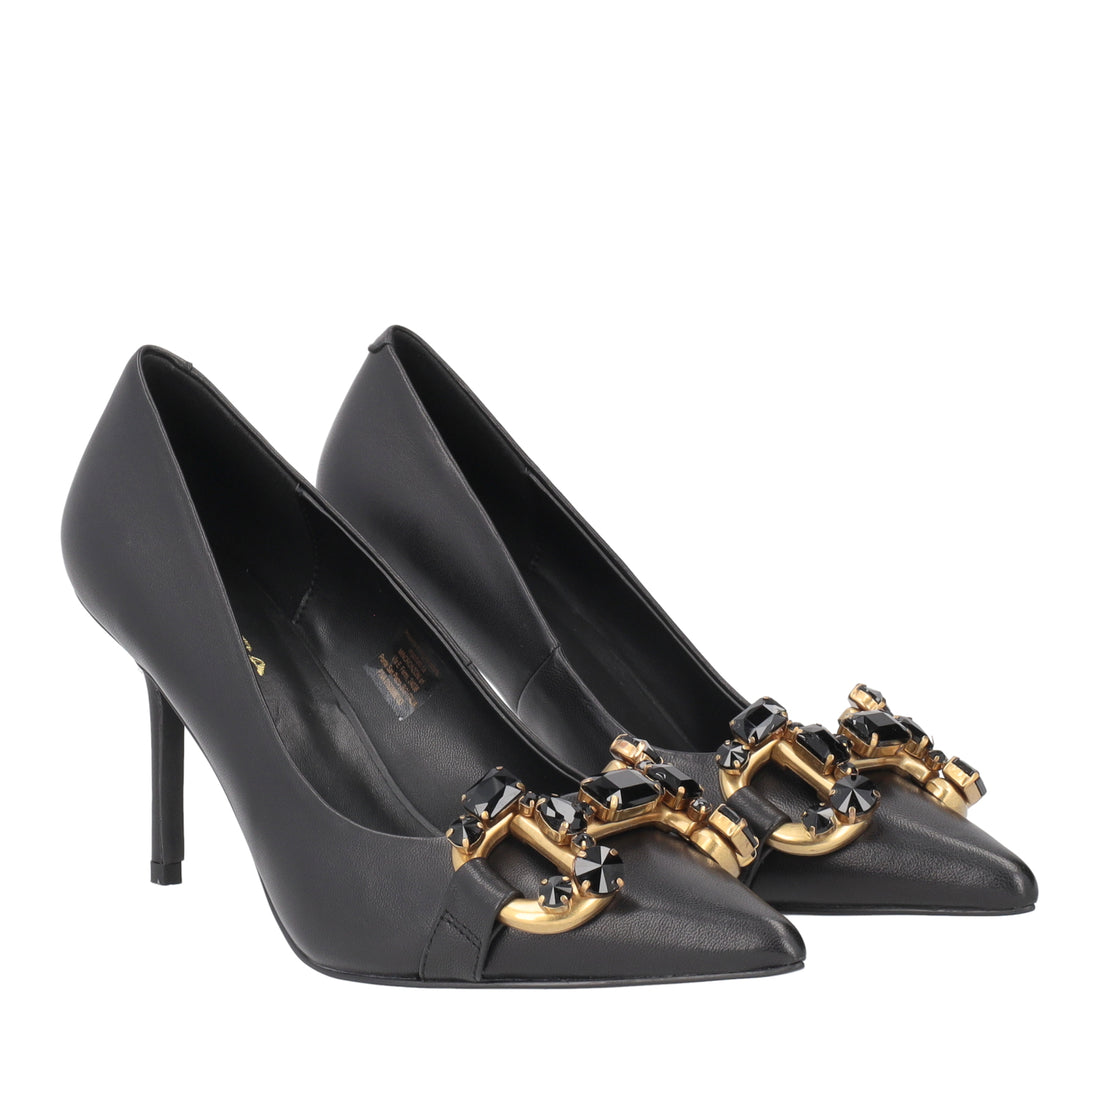 “CHARLOTTE” COURT SHOE IN BLACK NAPPA WITH A MID HEEL & DETAIL